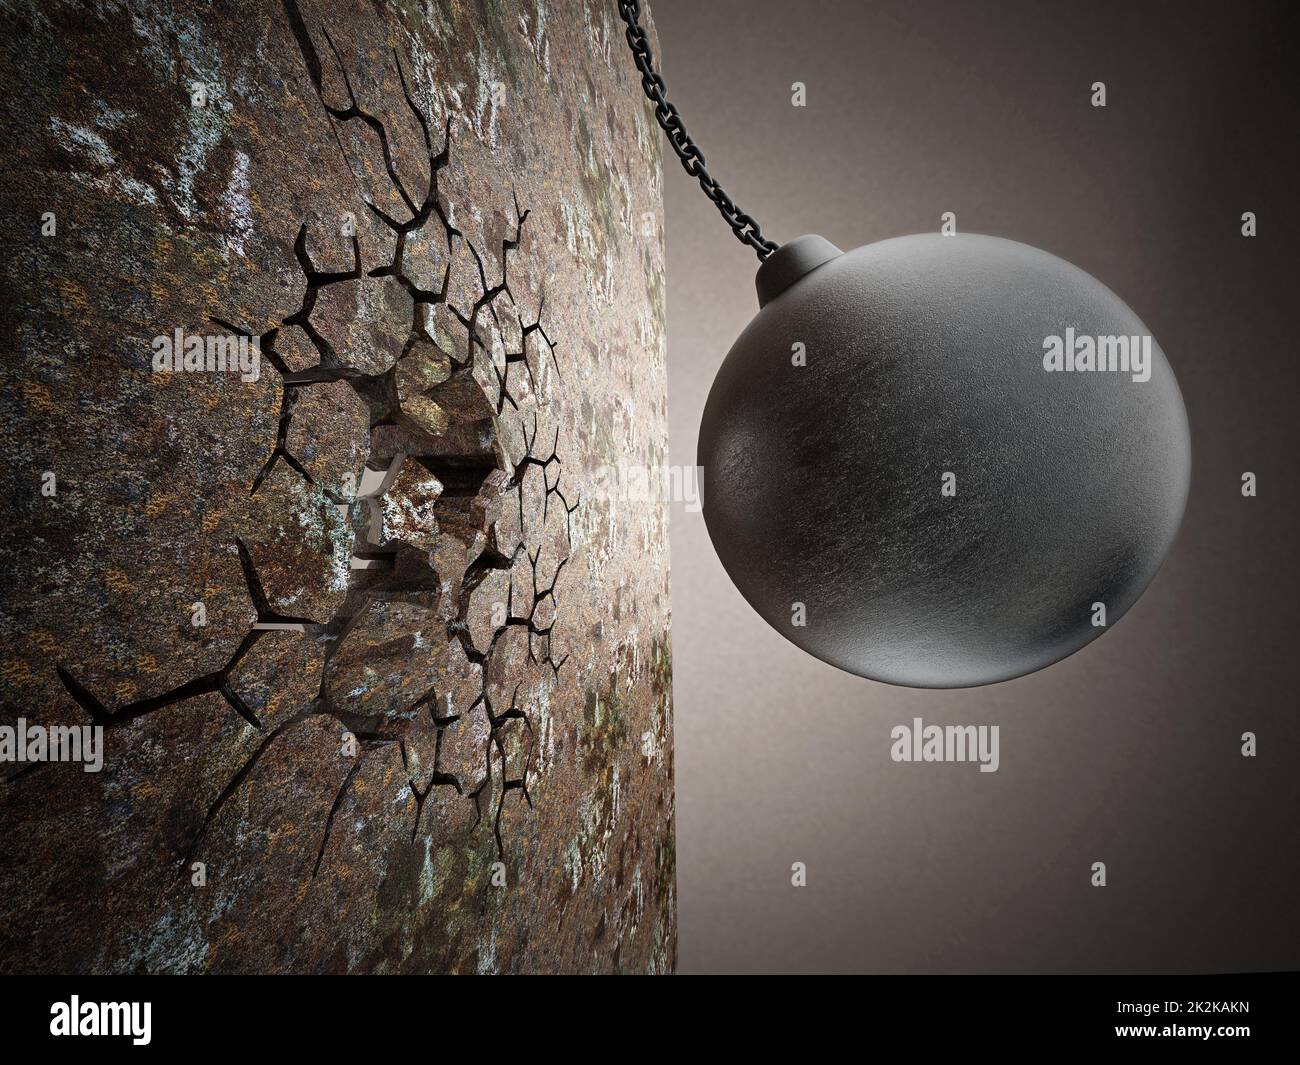 Wrecking ball demolishes old wall. 3D illustration Stock Photo